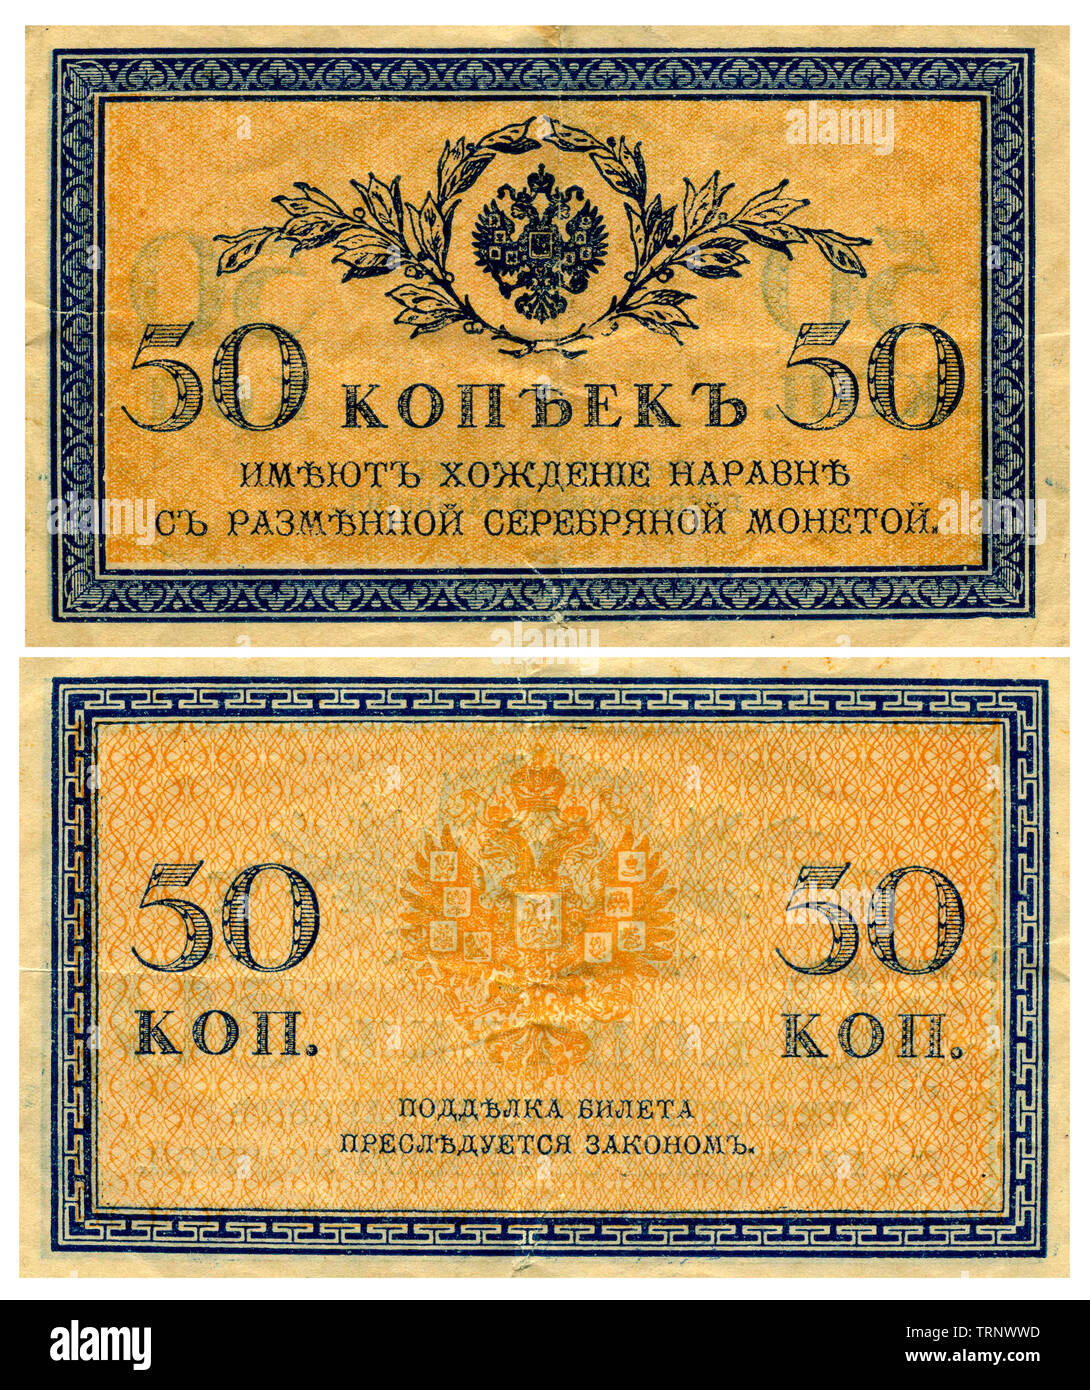 Old Russian banknote of 50 kopecks, 1915 of release. Stock Photo